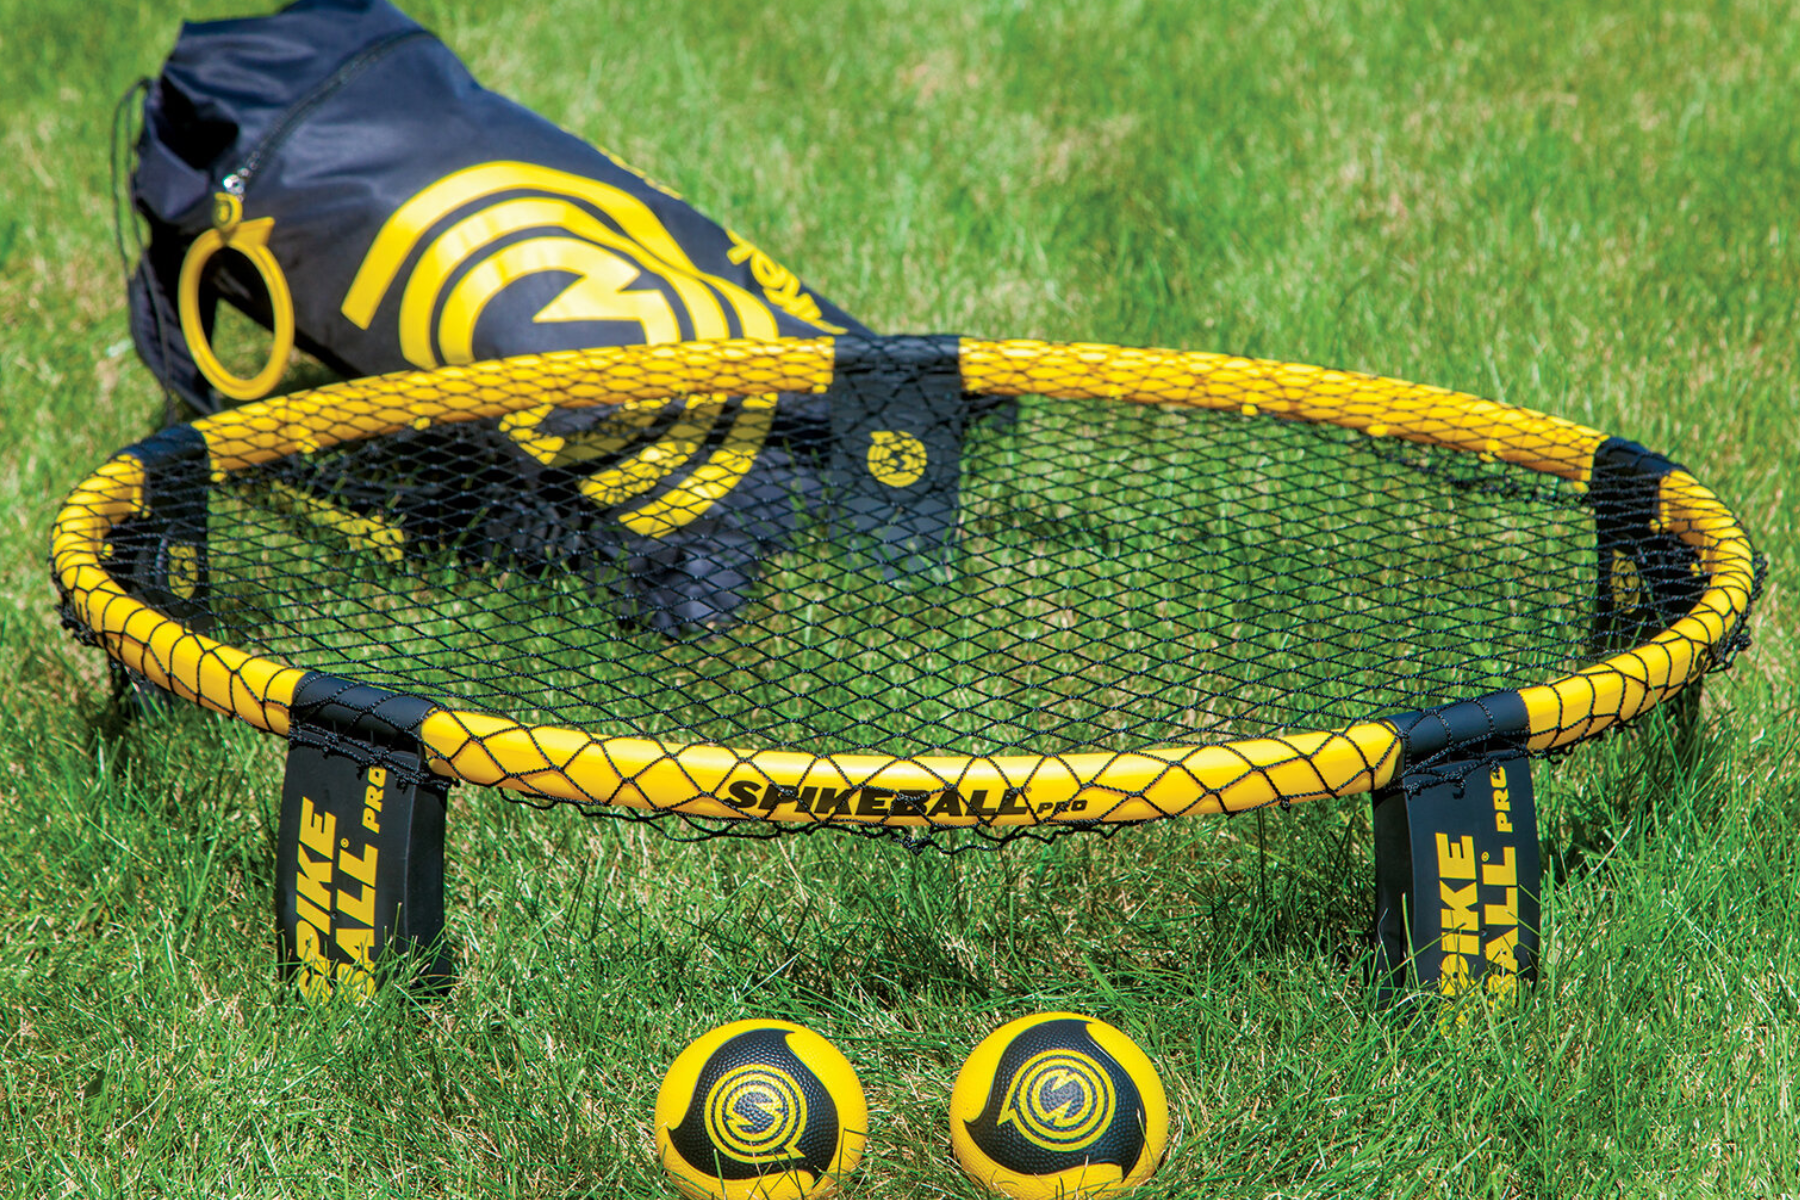 Is Spikeball Pro Worth It - Making An Informed Choice